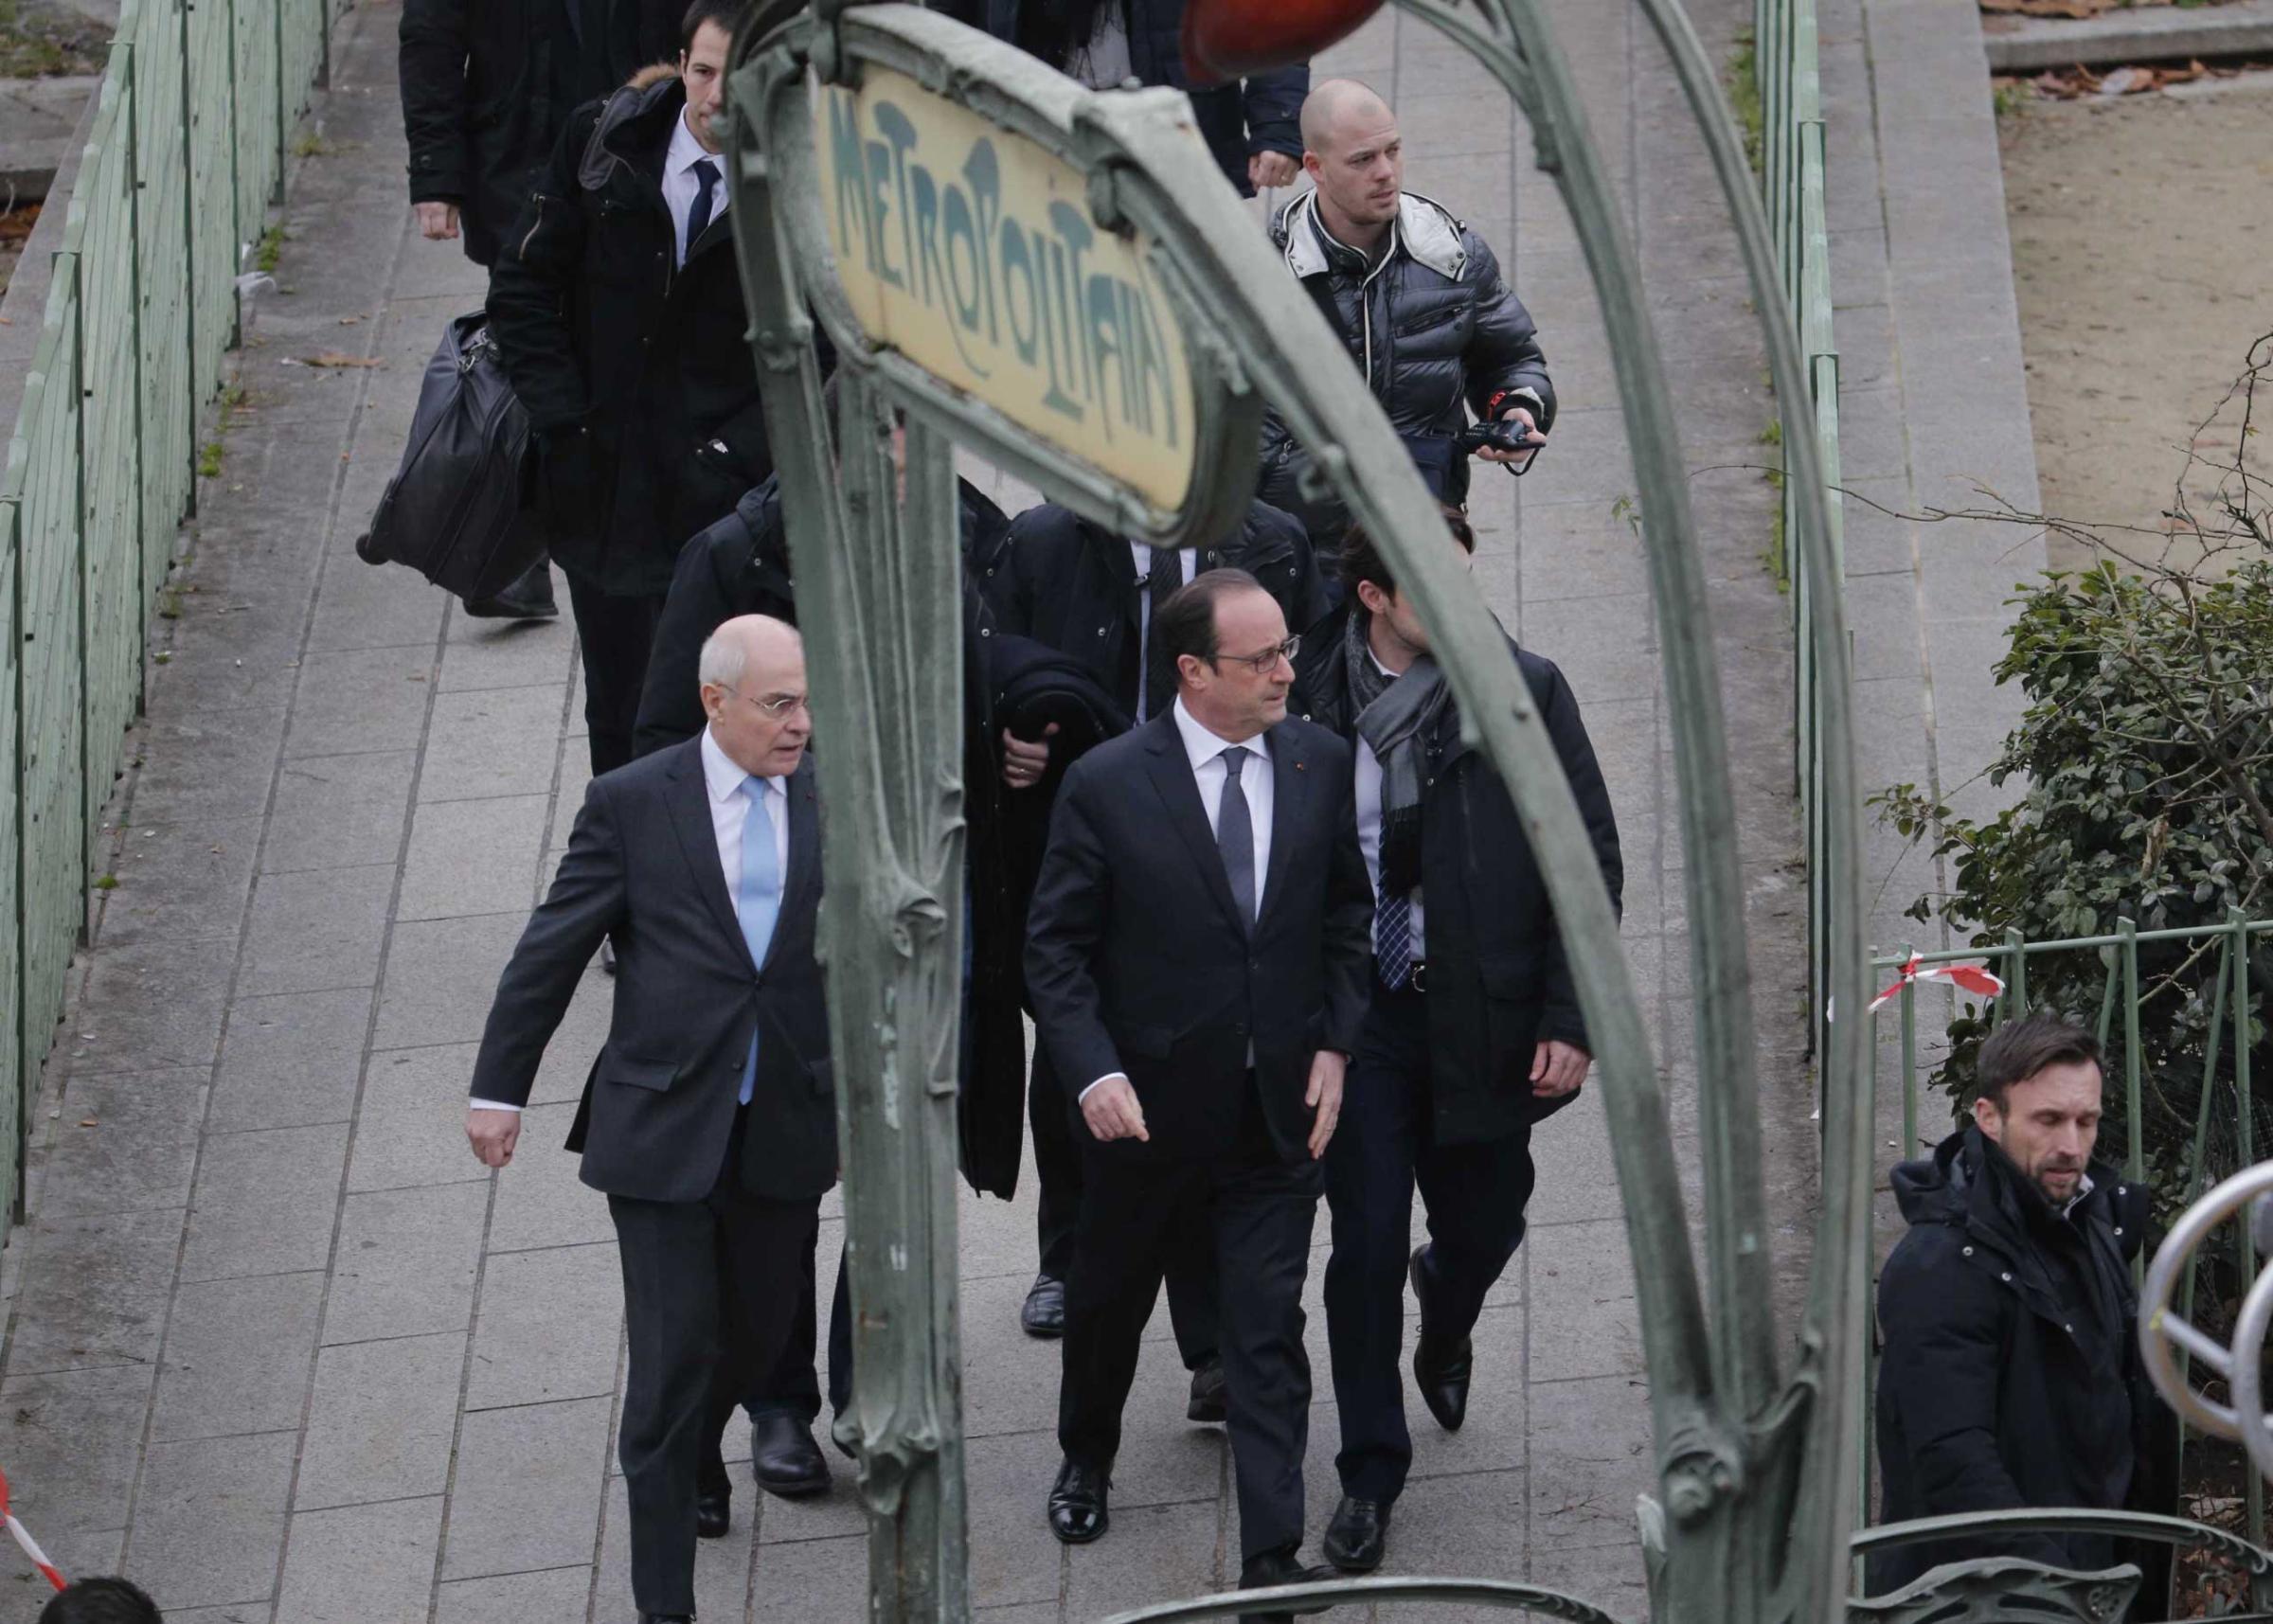 President Francois Hollande arrives after a shooting at the Paris offices of Charlie Hebdo, a satirical newspaper, Jan. 7, 2015.